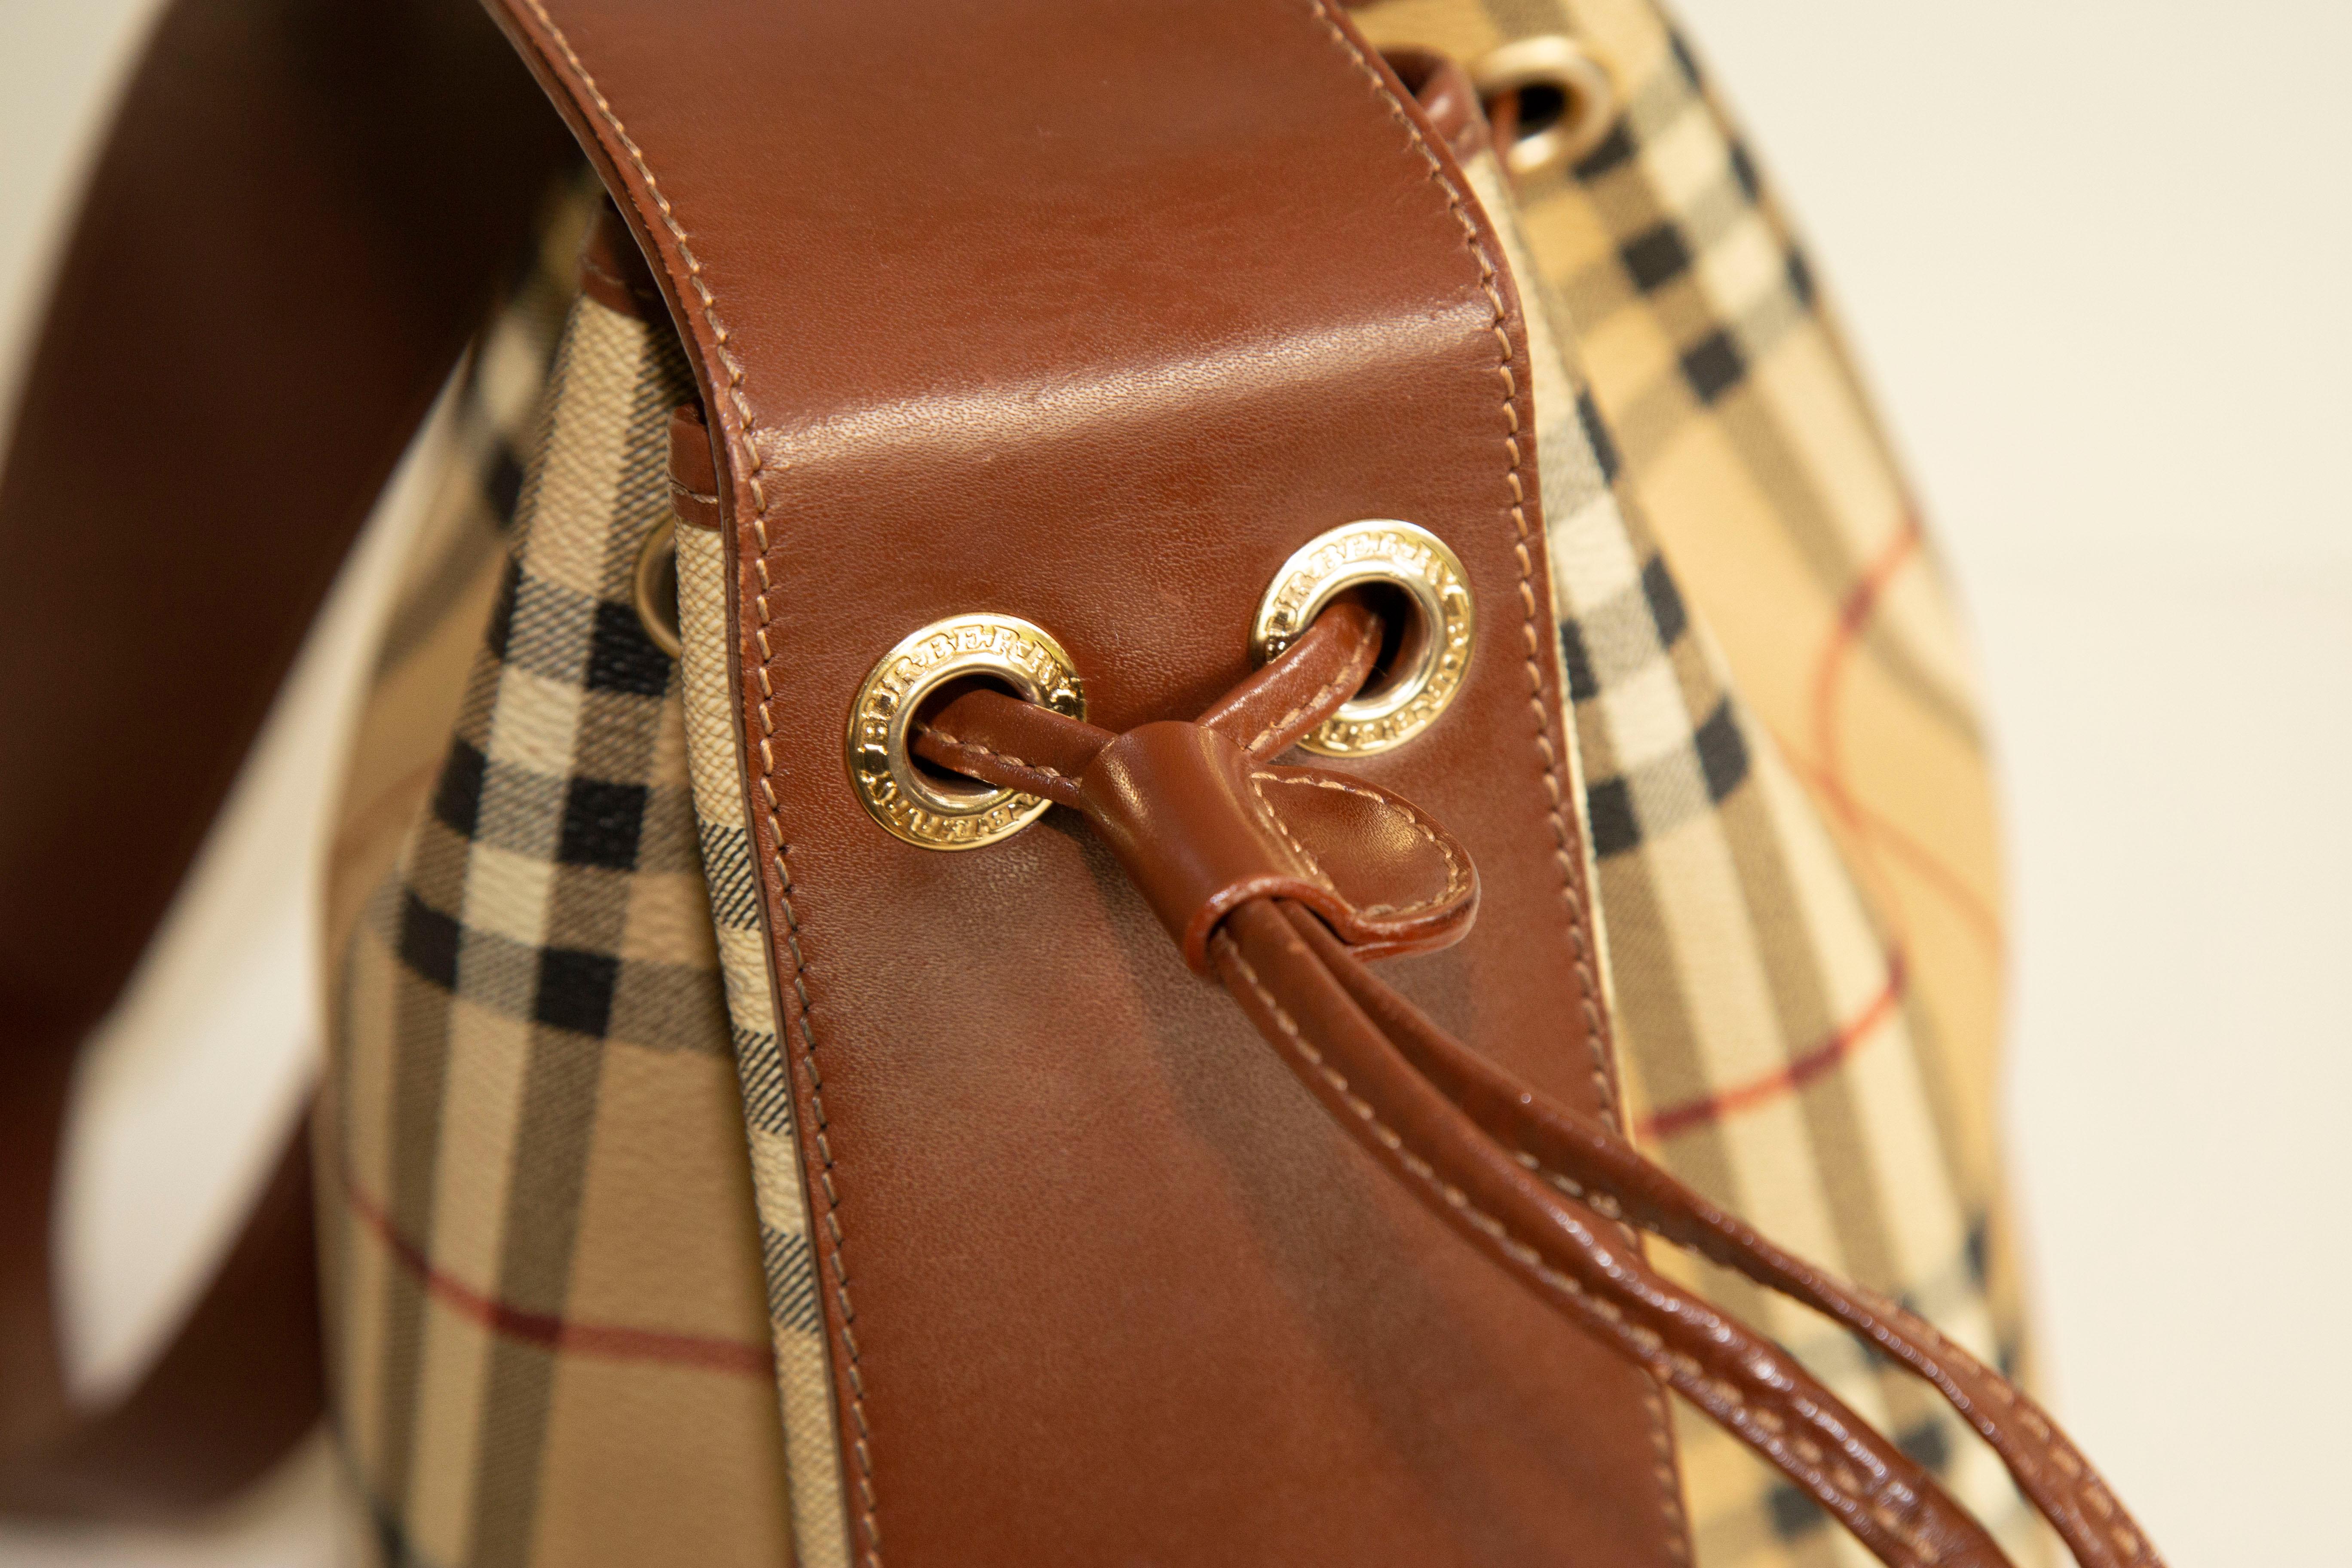 A Burberry Bucket bag. The bag features a classic check pattern exterior, brown leather trim, and gold-toned hardware. The interior is lined with black fabric and there is one side pocket with a zipper. The interior is neat & clean. The exterior,